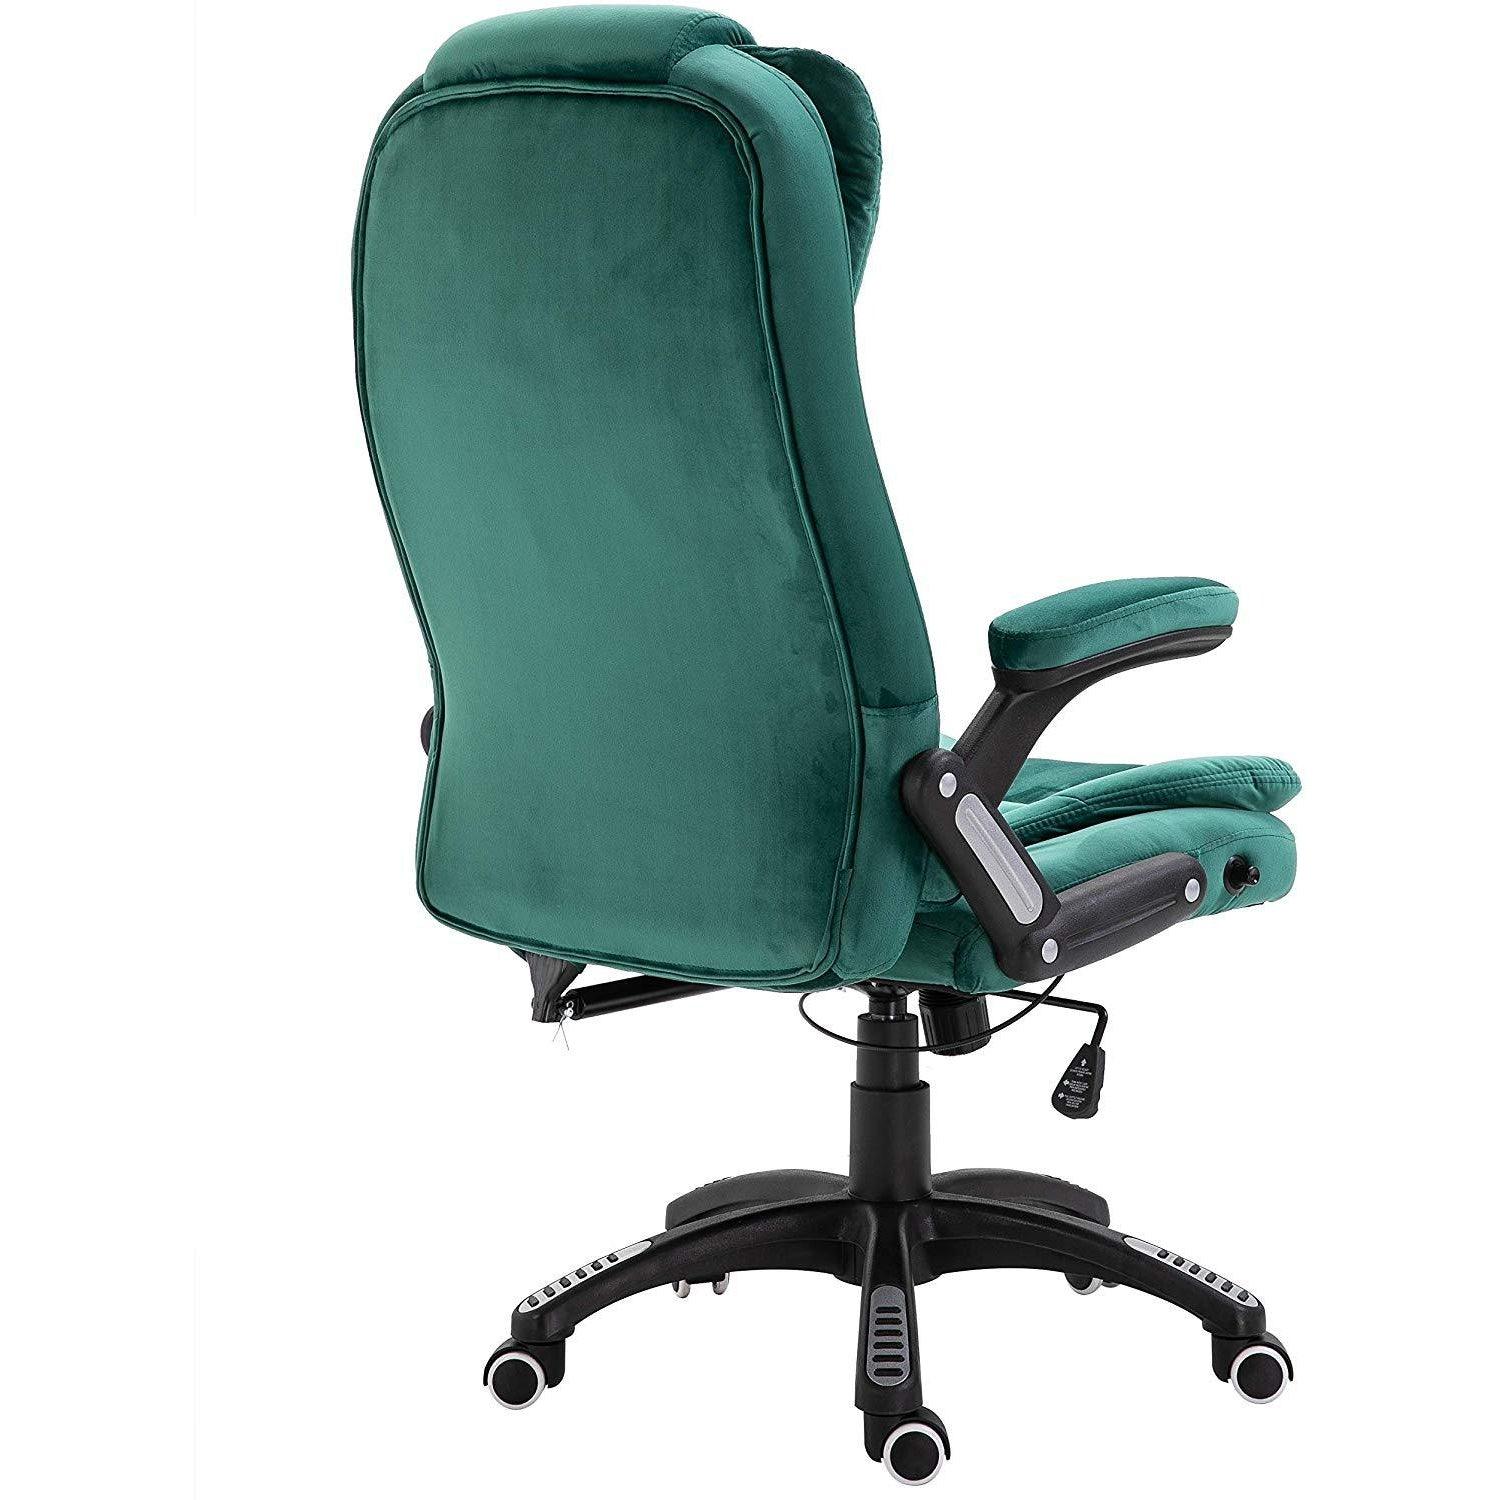 Cherry Tree Furniture Executive Recline Extra Padded Office Chair Standard, MO17 Green Velvet